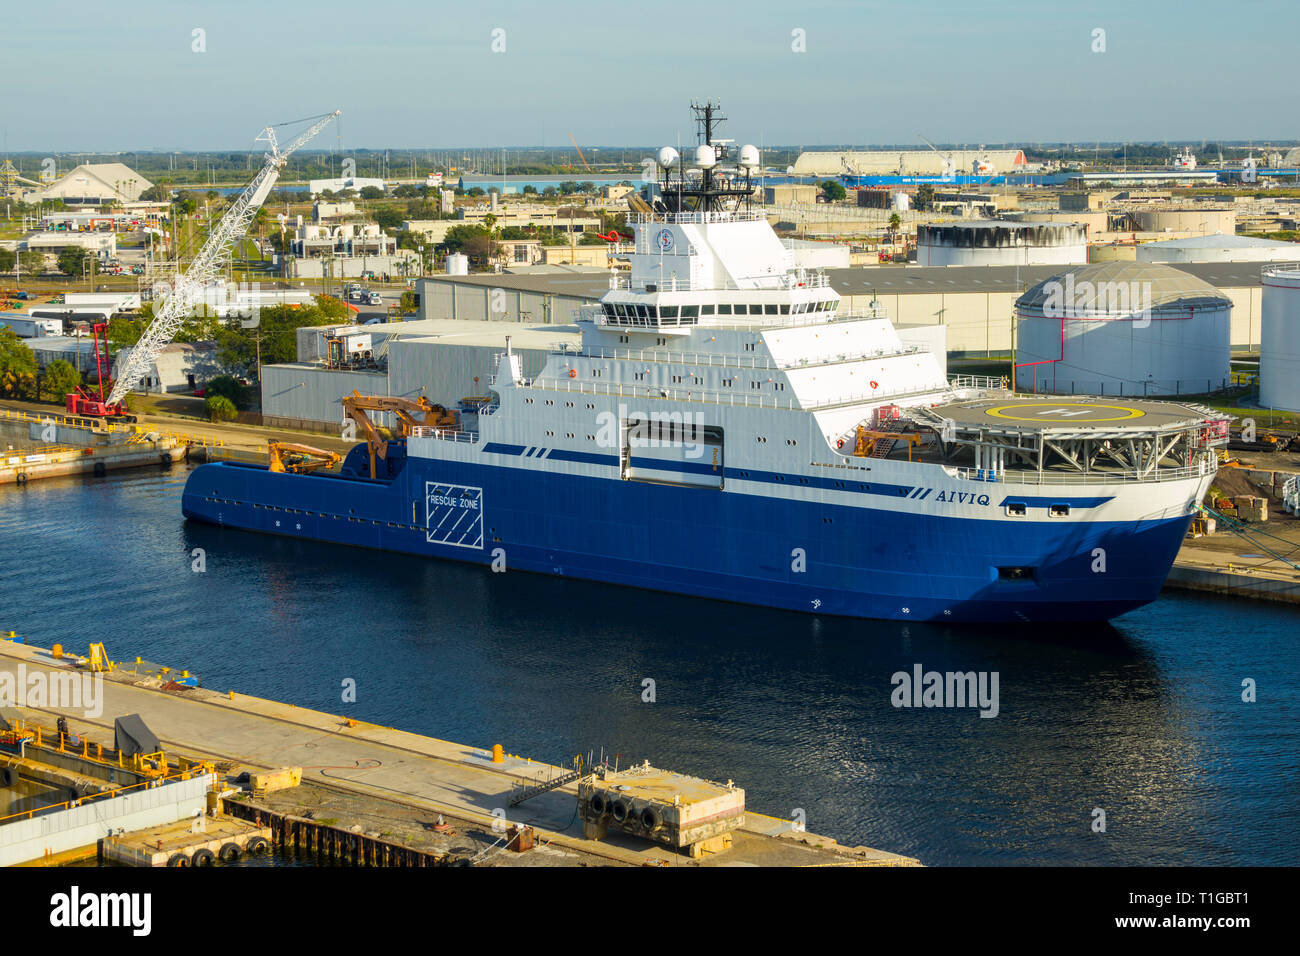 Aiviq is an American icebreaking anchor handling tug supply vessel owned by Edison Chouest Offshore. The $200 million vessel was built in 2012 by Nort Stock Photo